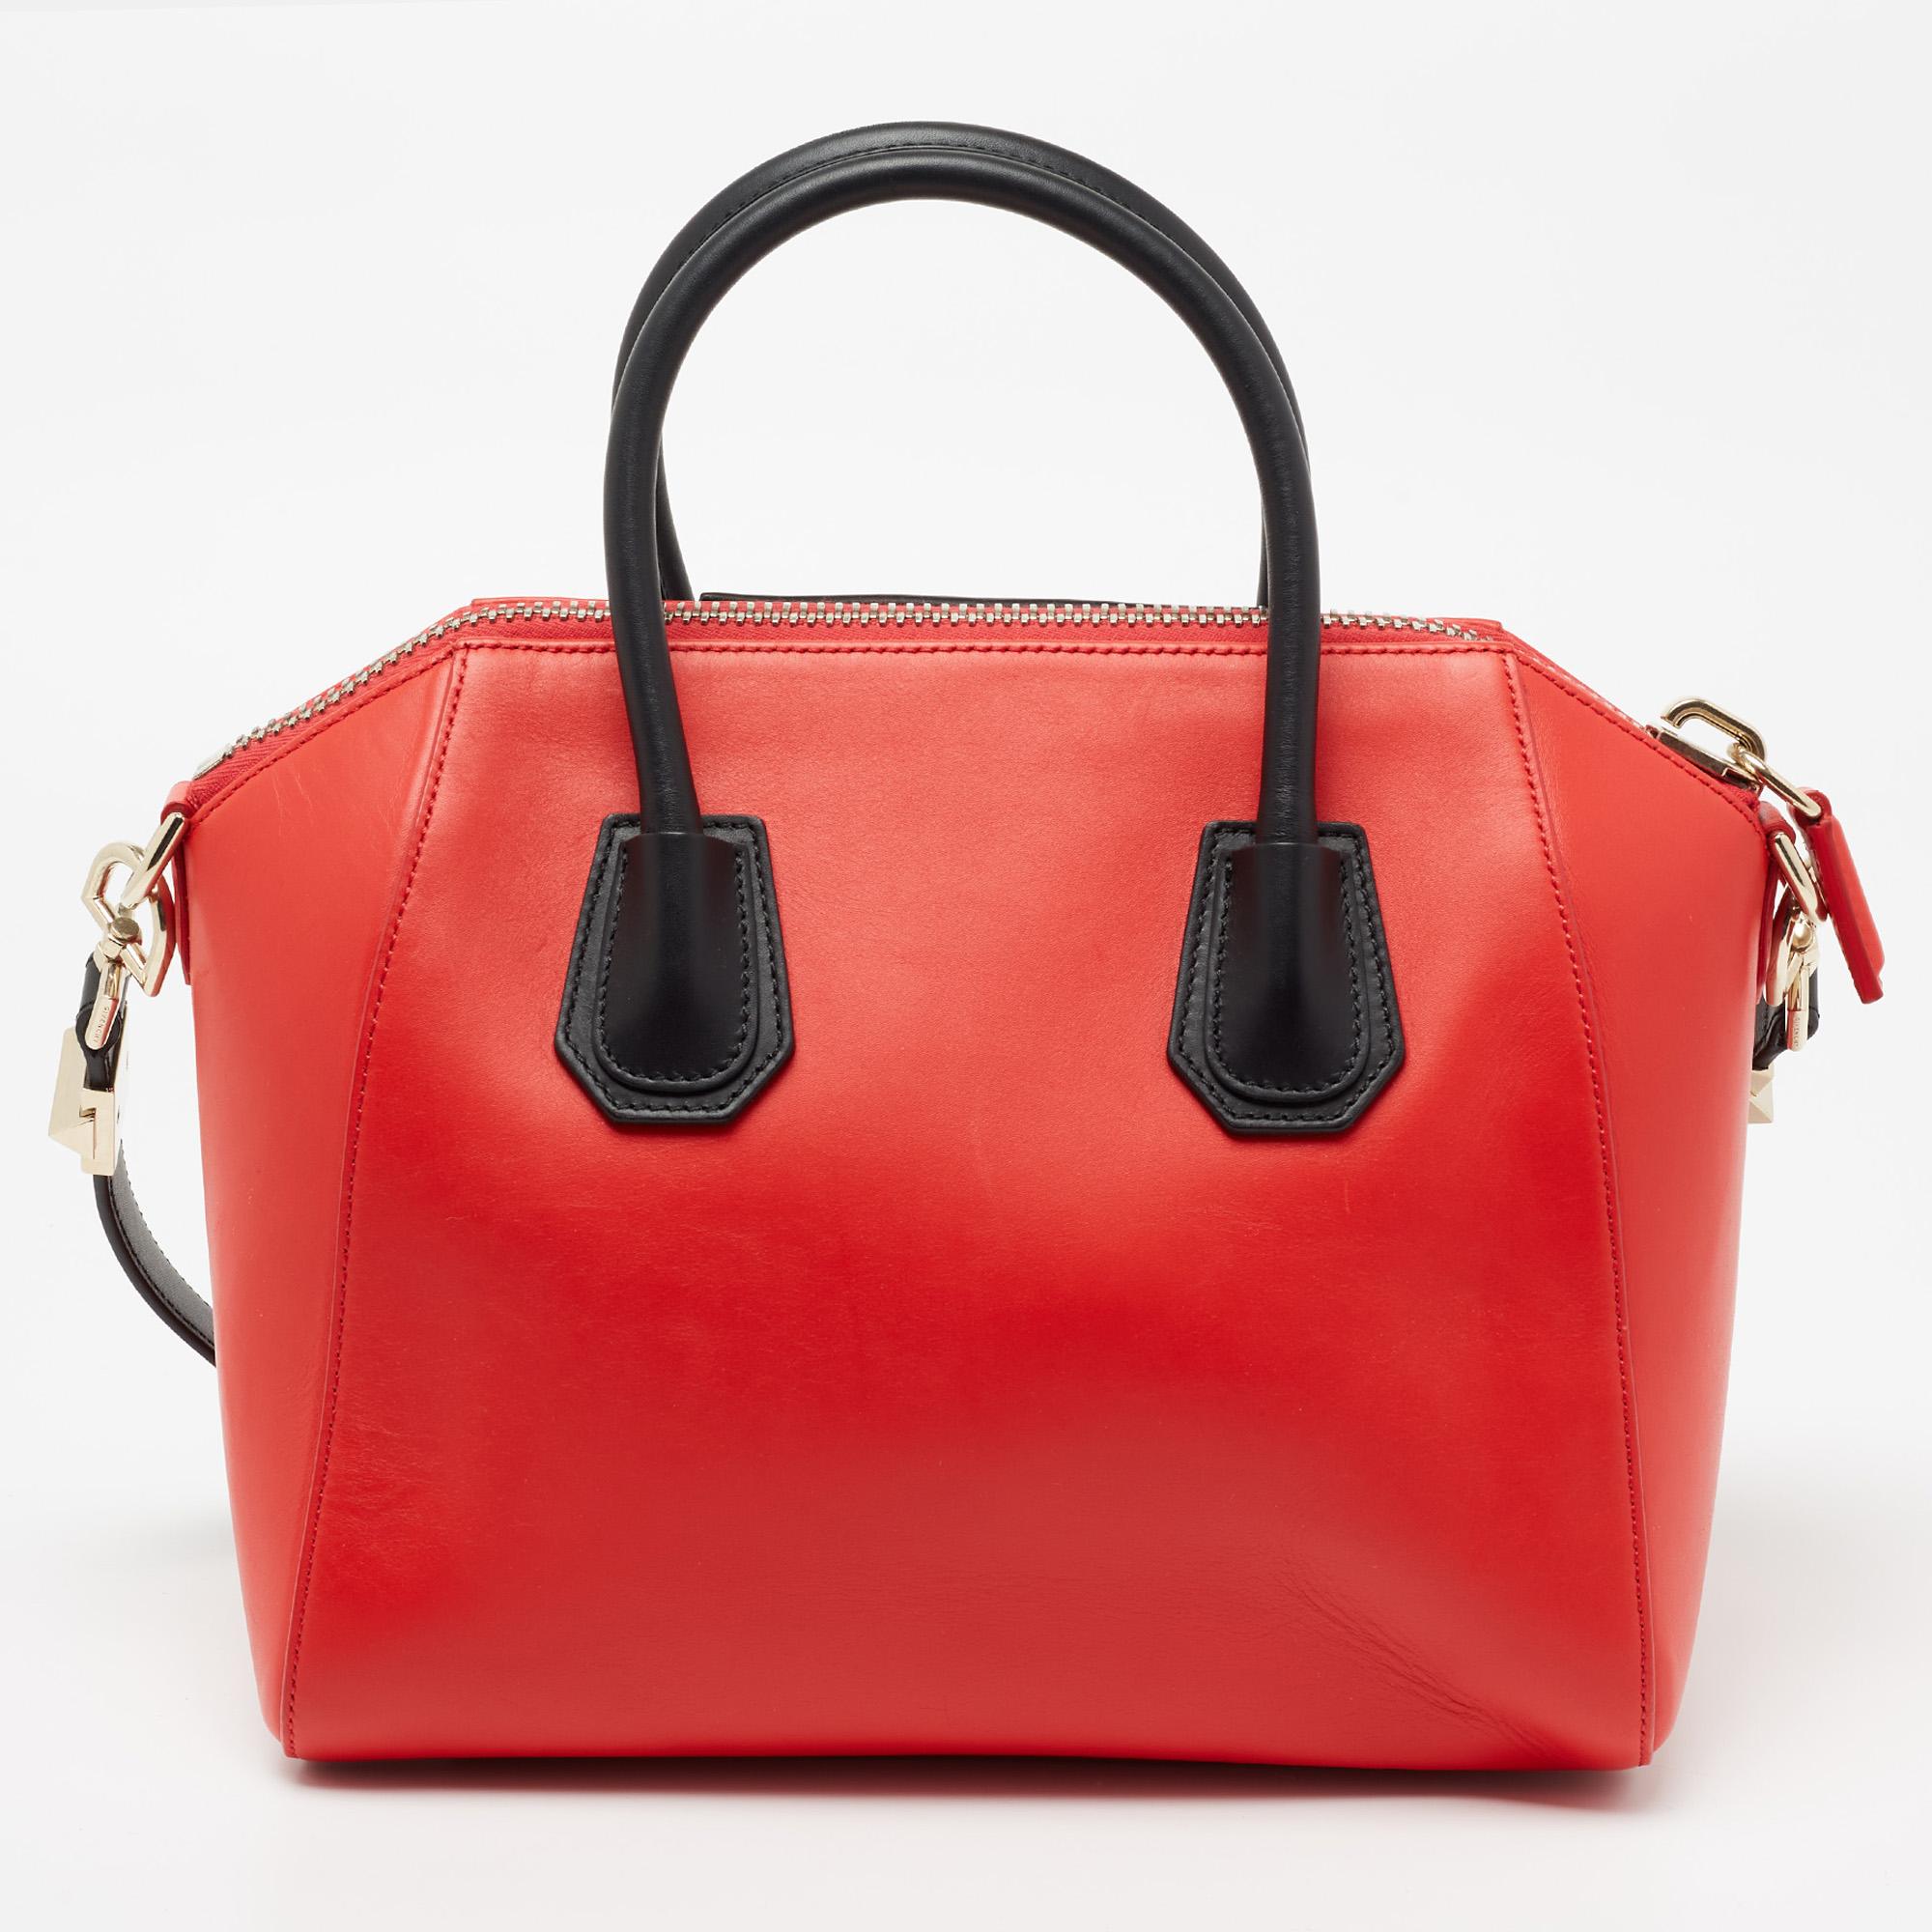 Made in Italy and loved by women worldwide is this beautiful Antigona satchel by Givenchy. It has been crafted from leather and is shaped elegantly. The red-black bag has a top zipper that reveals a canvas interior. It is held by two top handles and